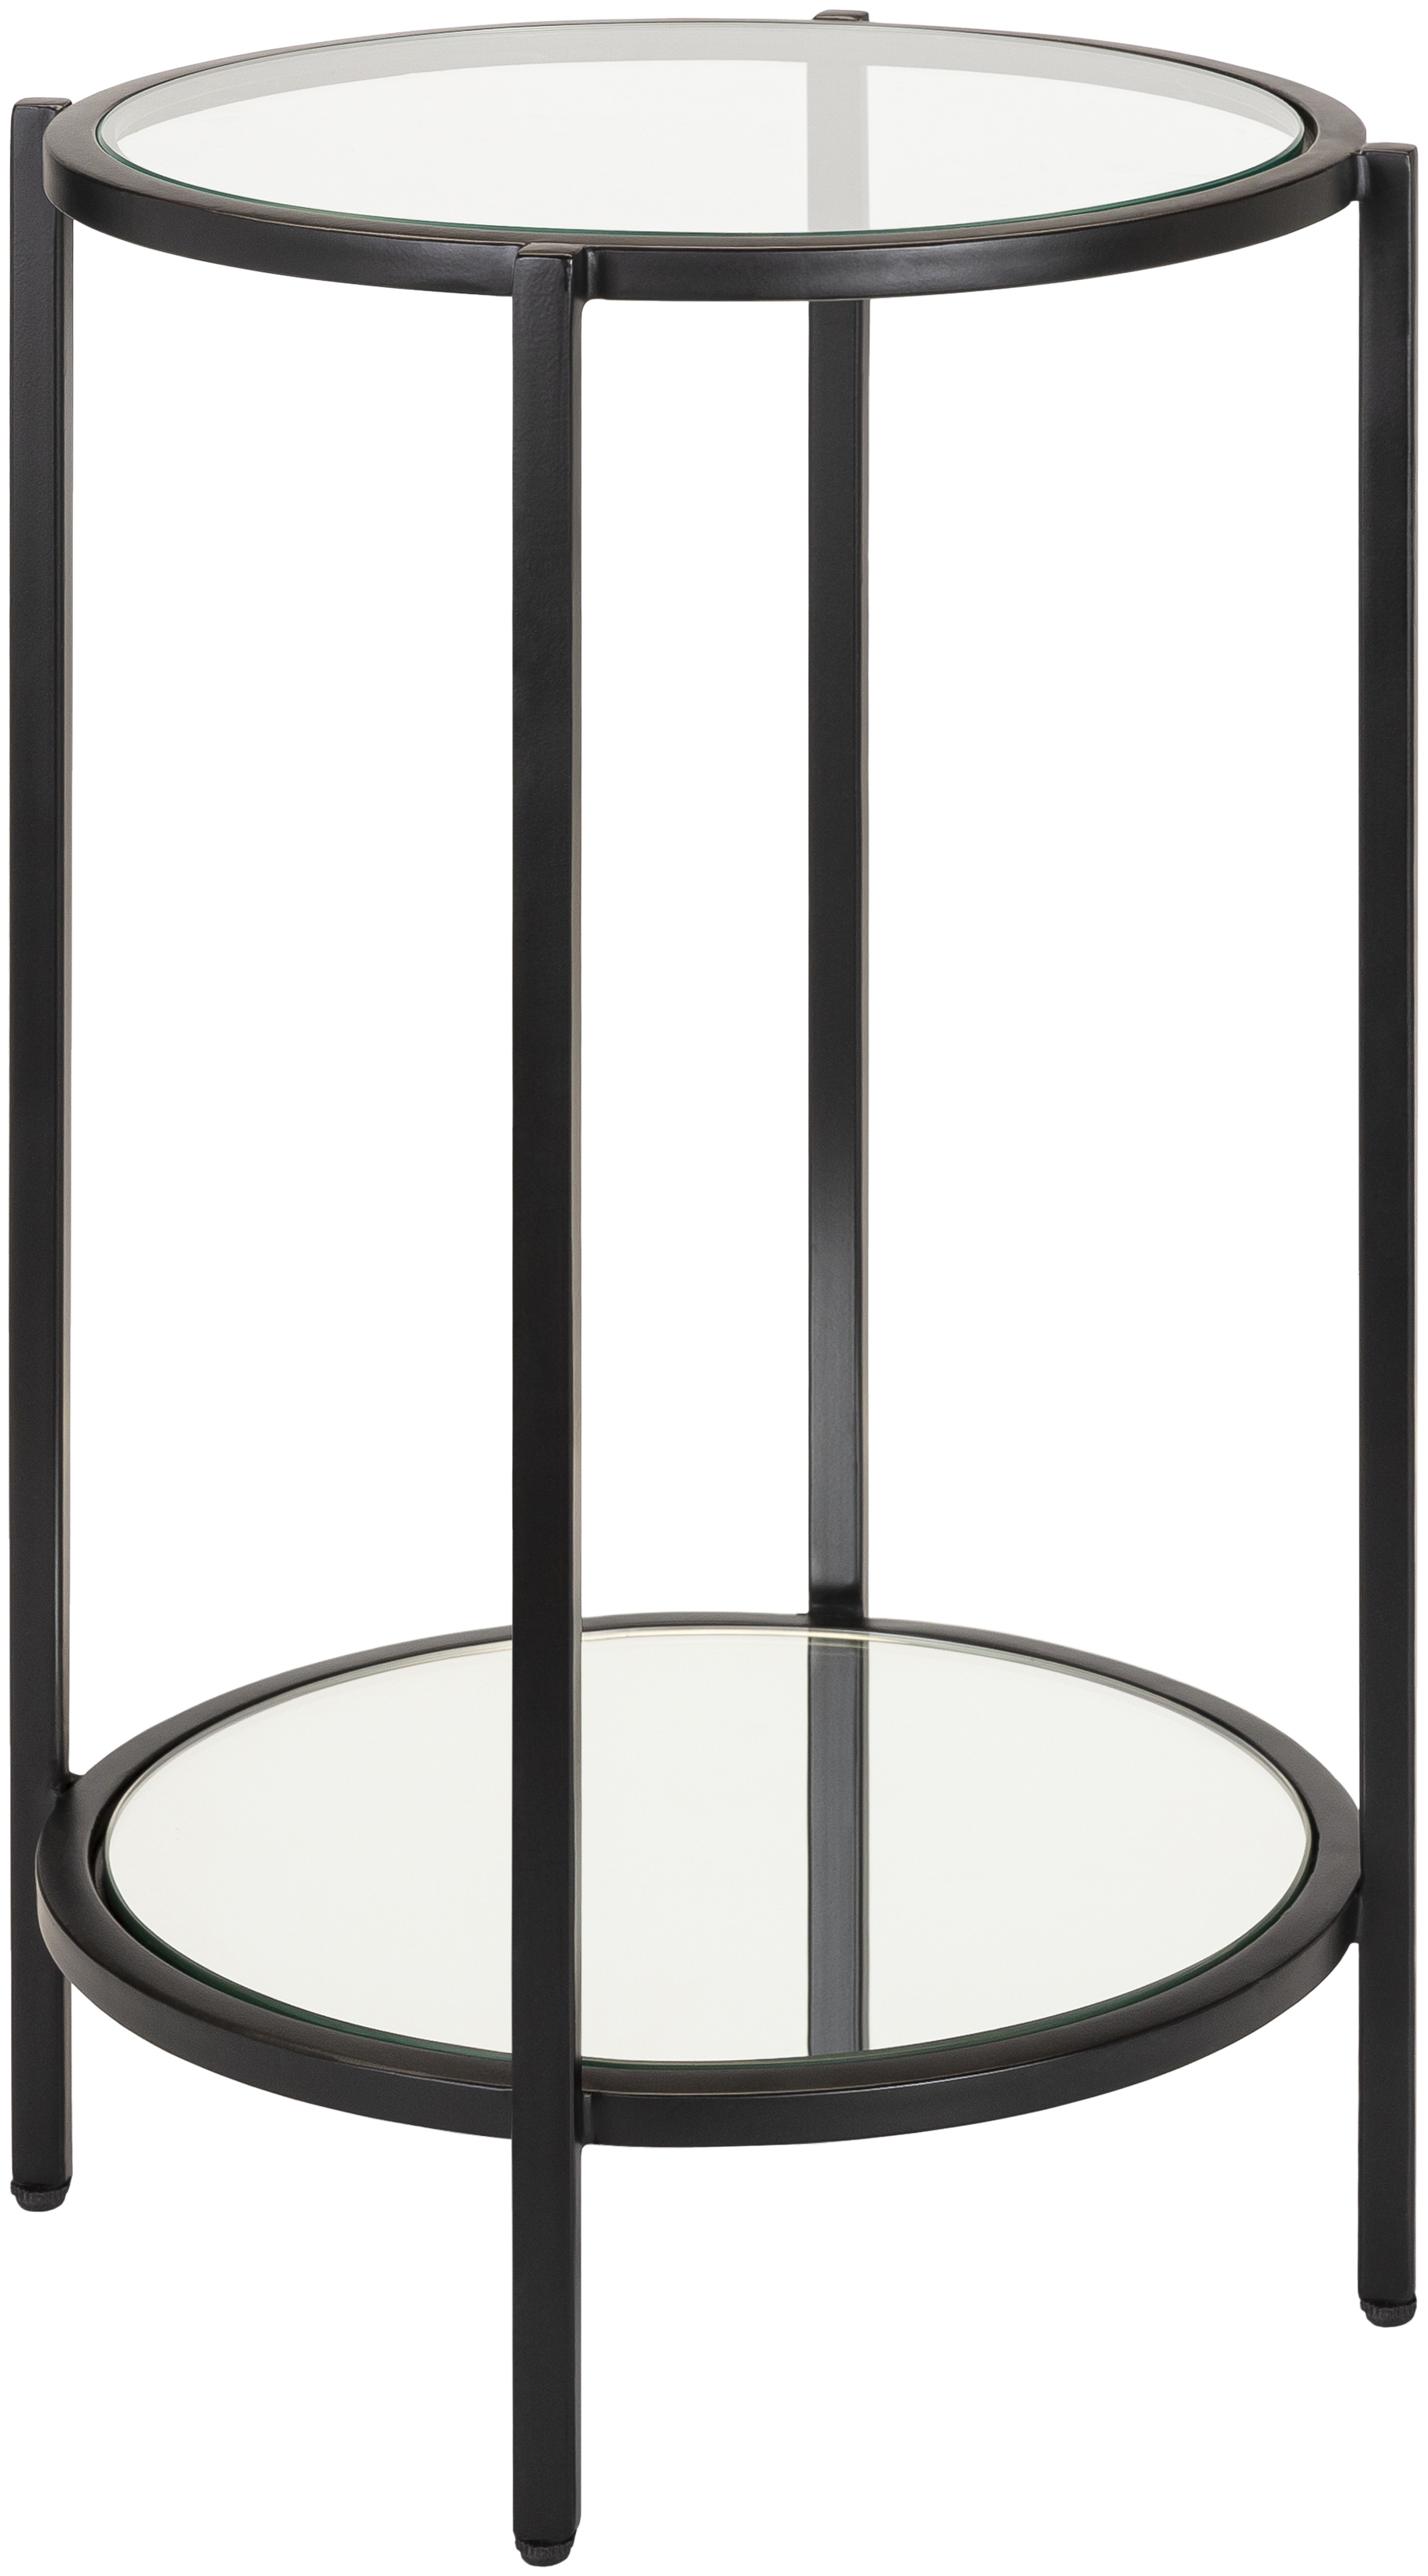 Alecsa Glass Accent Table - Image 1